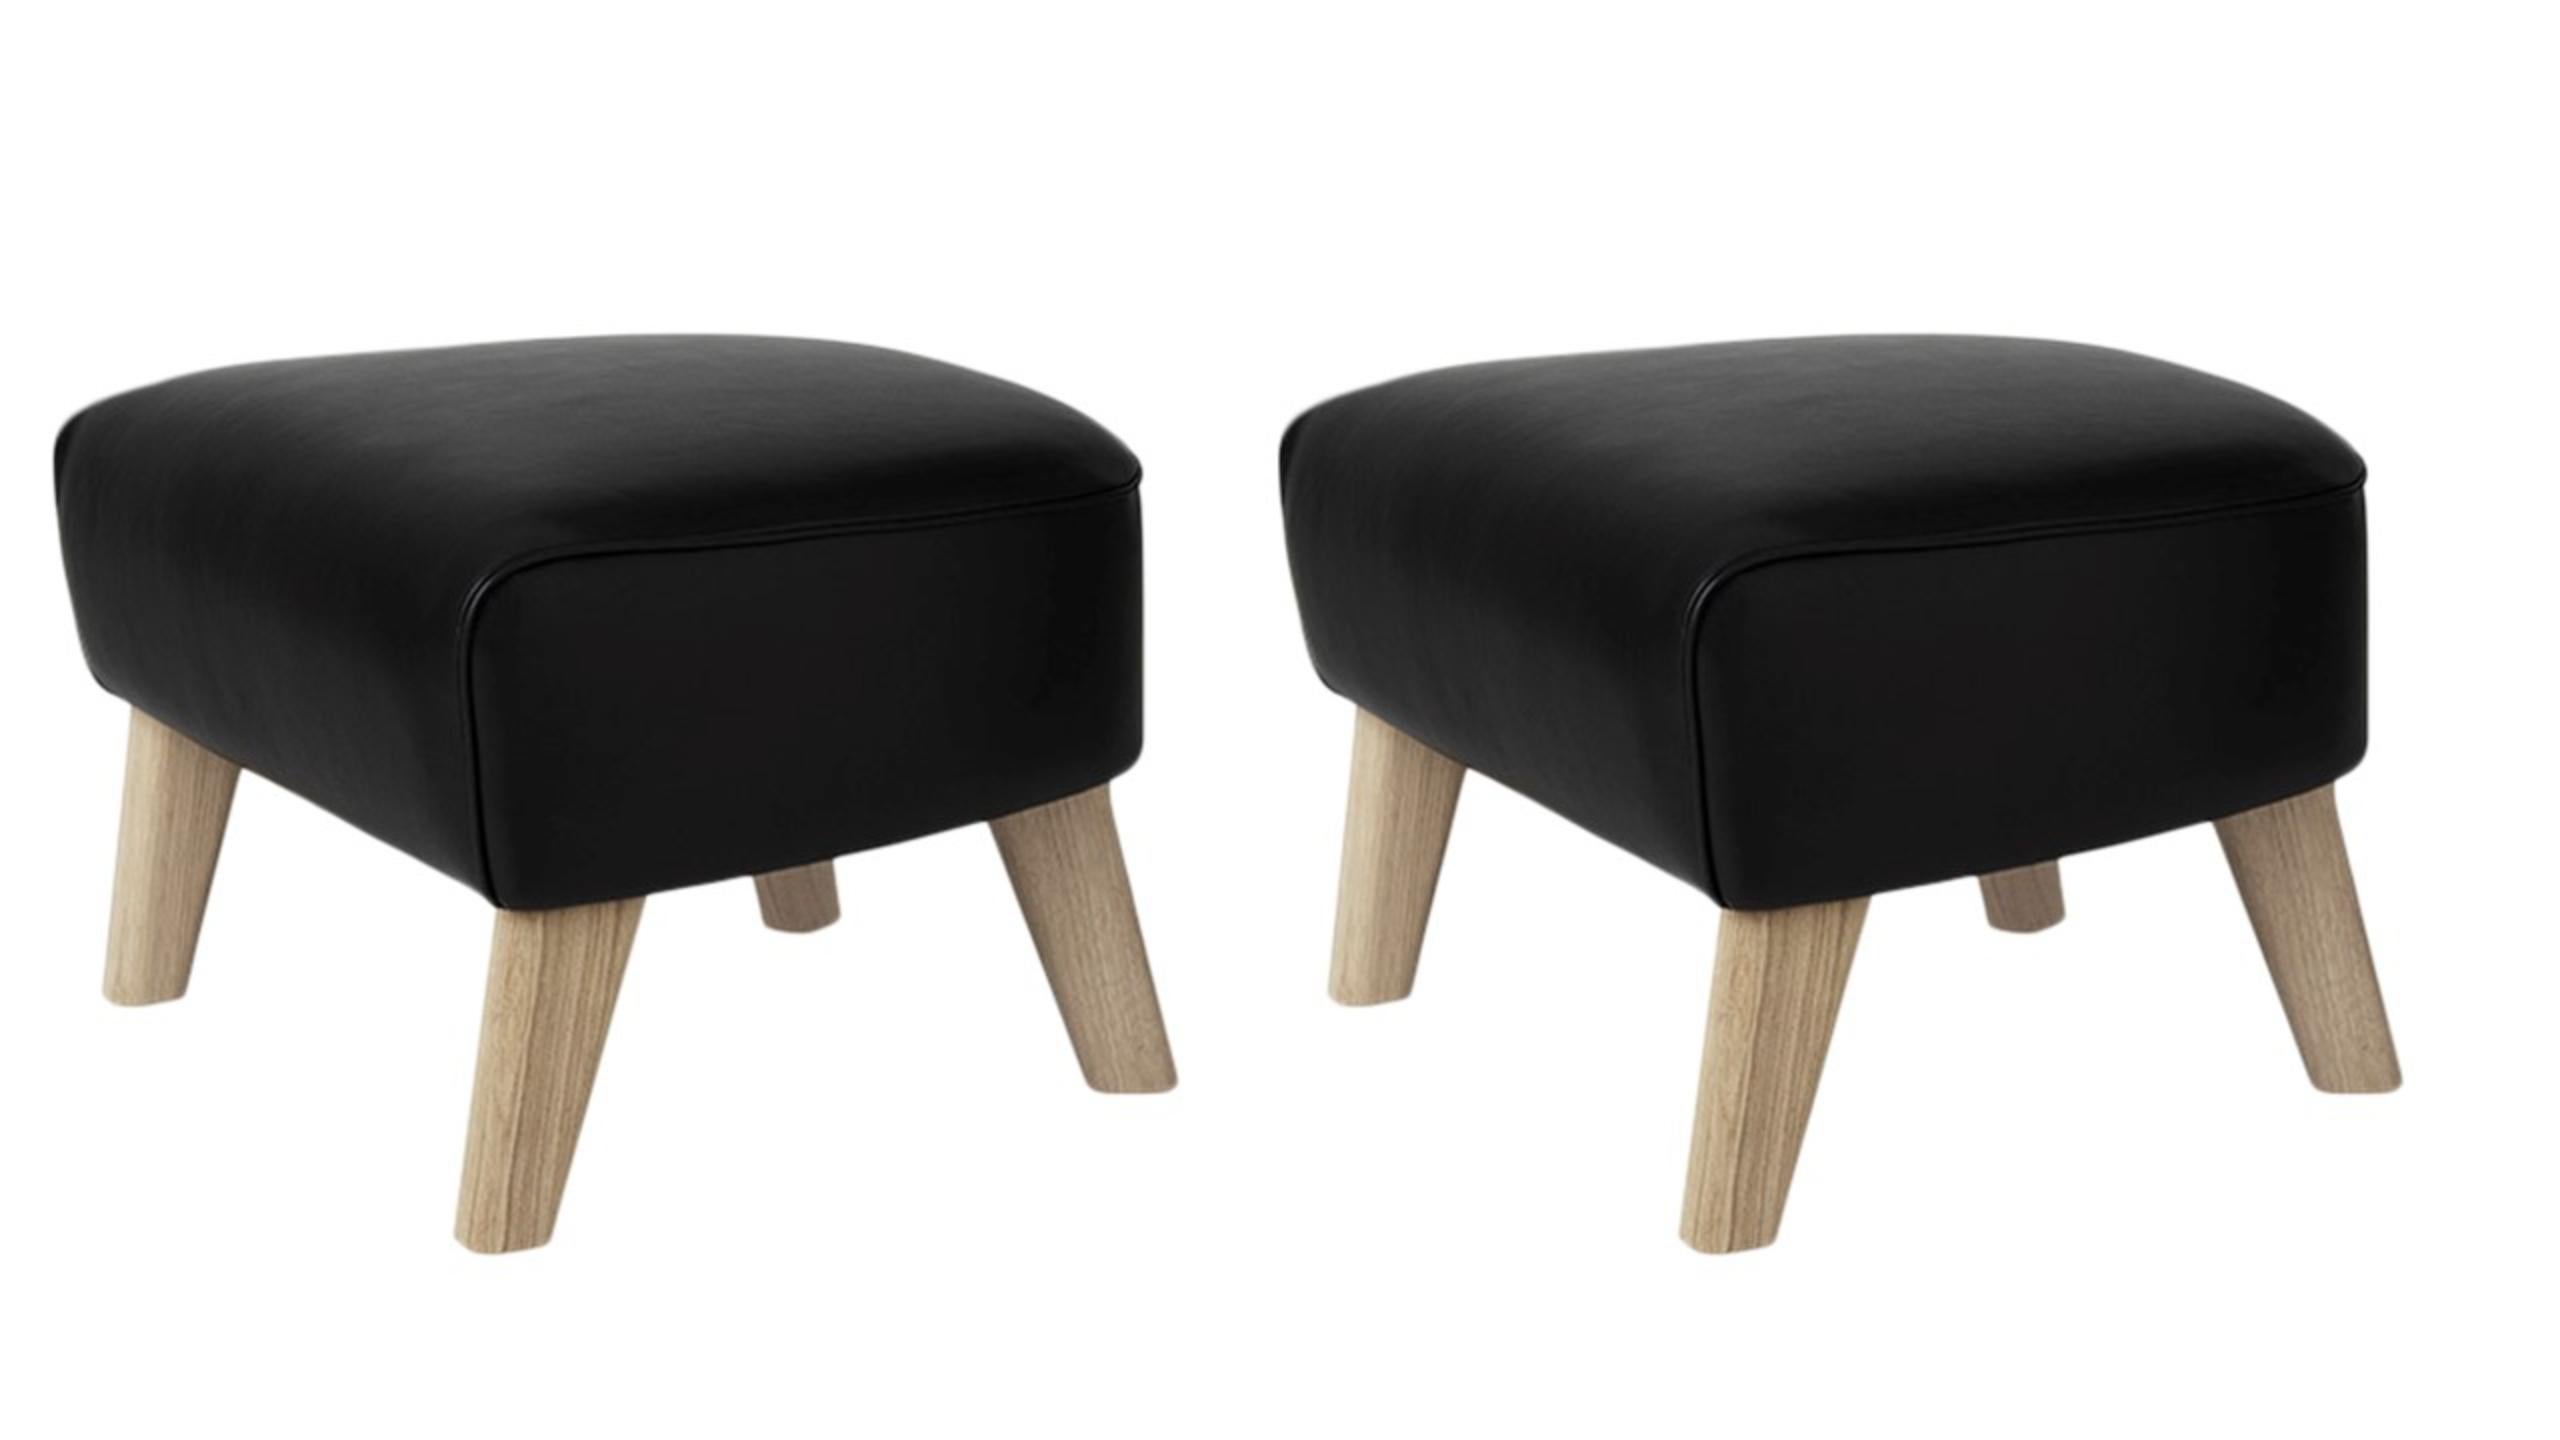 Set of 2 black leather and natural oak my own chair footstools by Lassen
Dimensions: W 56 x D 58 x H 40 cm 
Materials: Leather

The my own chair footstool has been designed in the same spirit as Flemming Lassen’s original iconic chair,